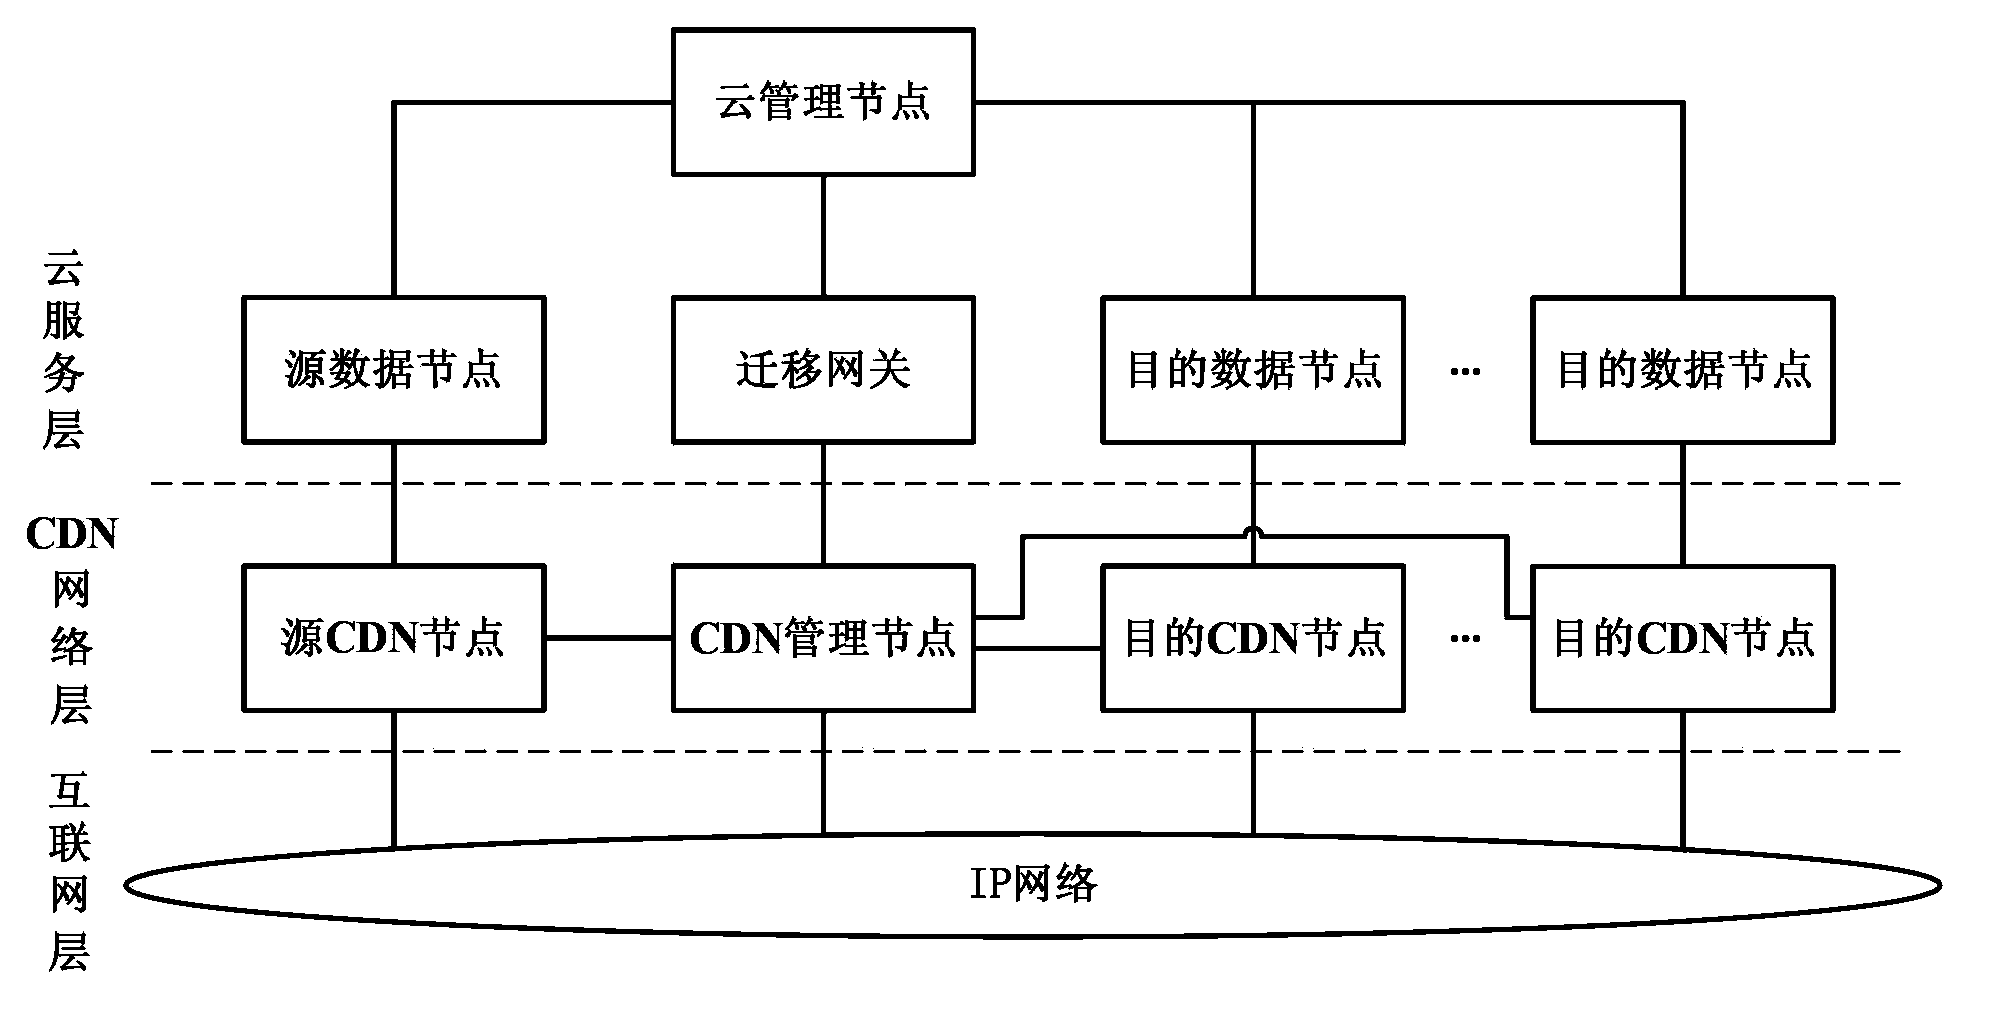 Method and system for migrating data